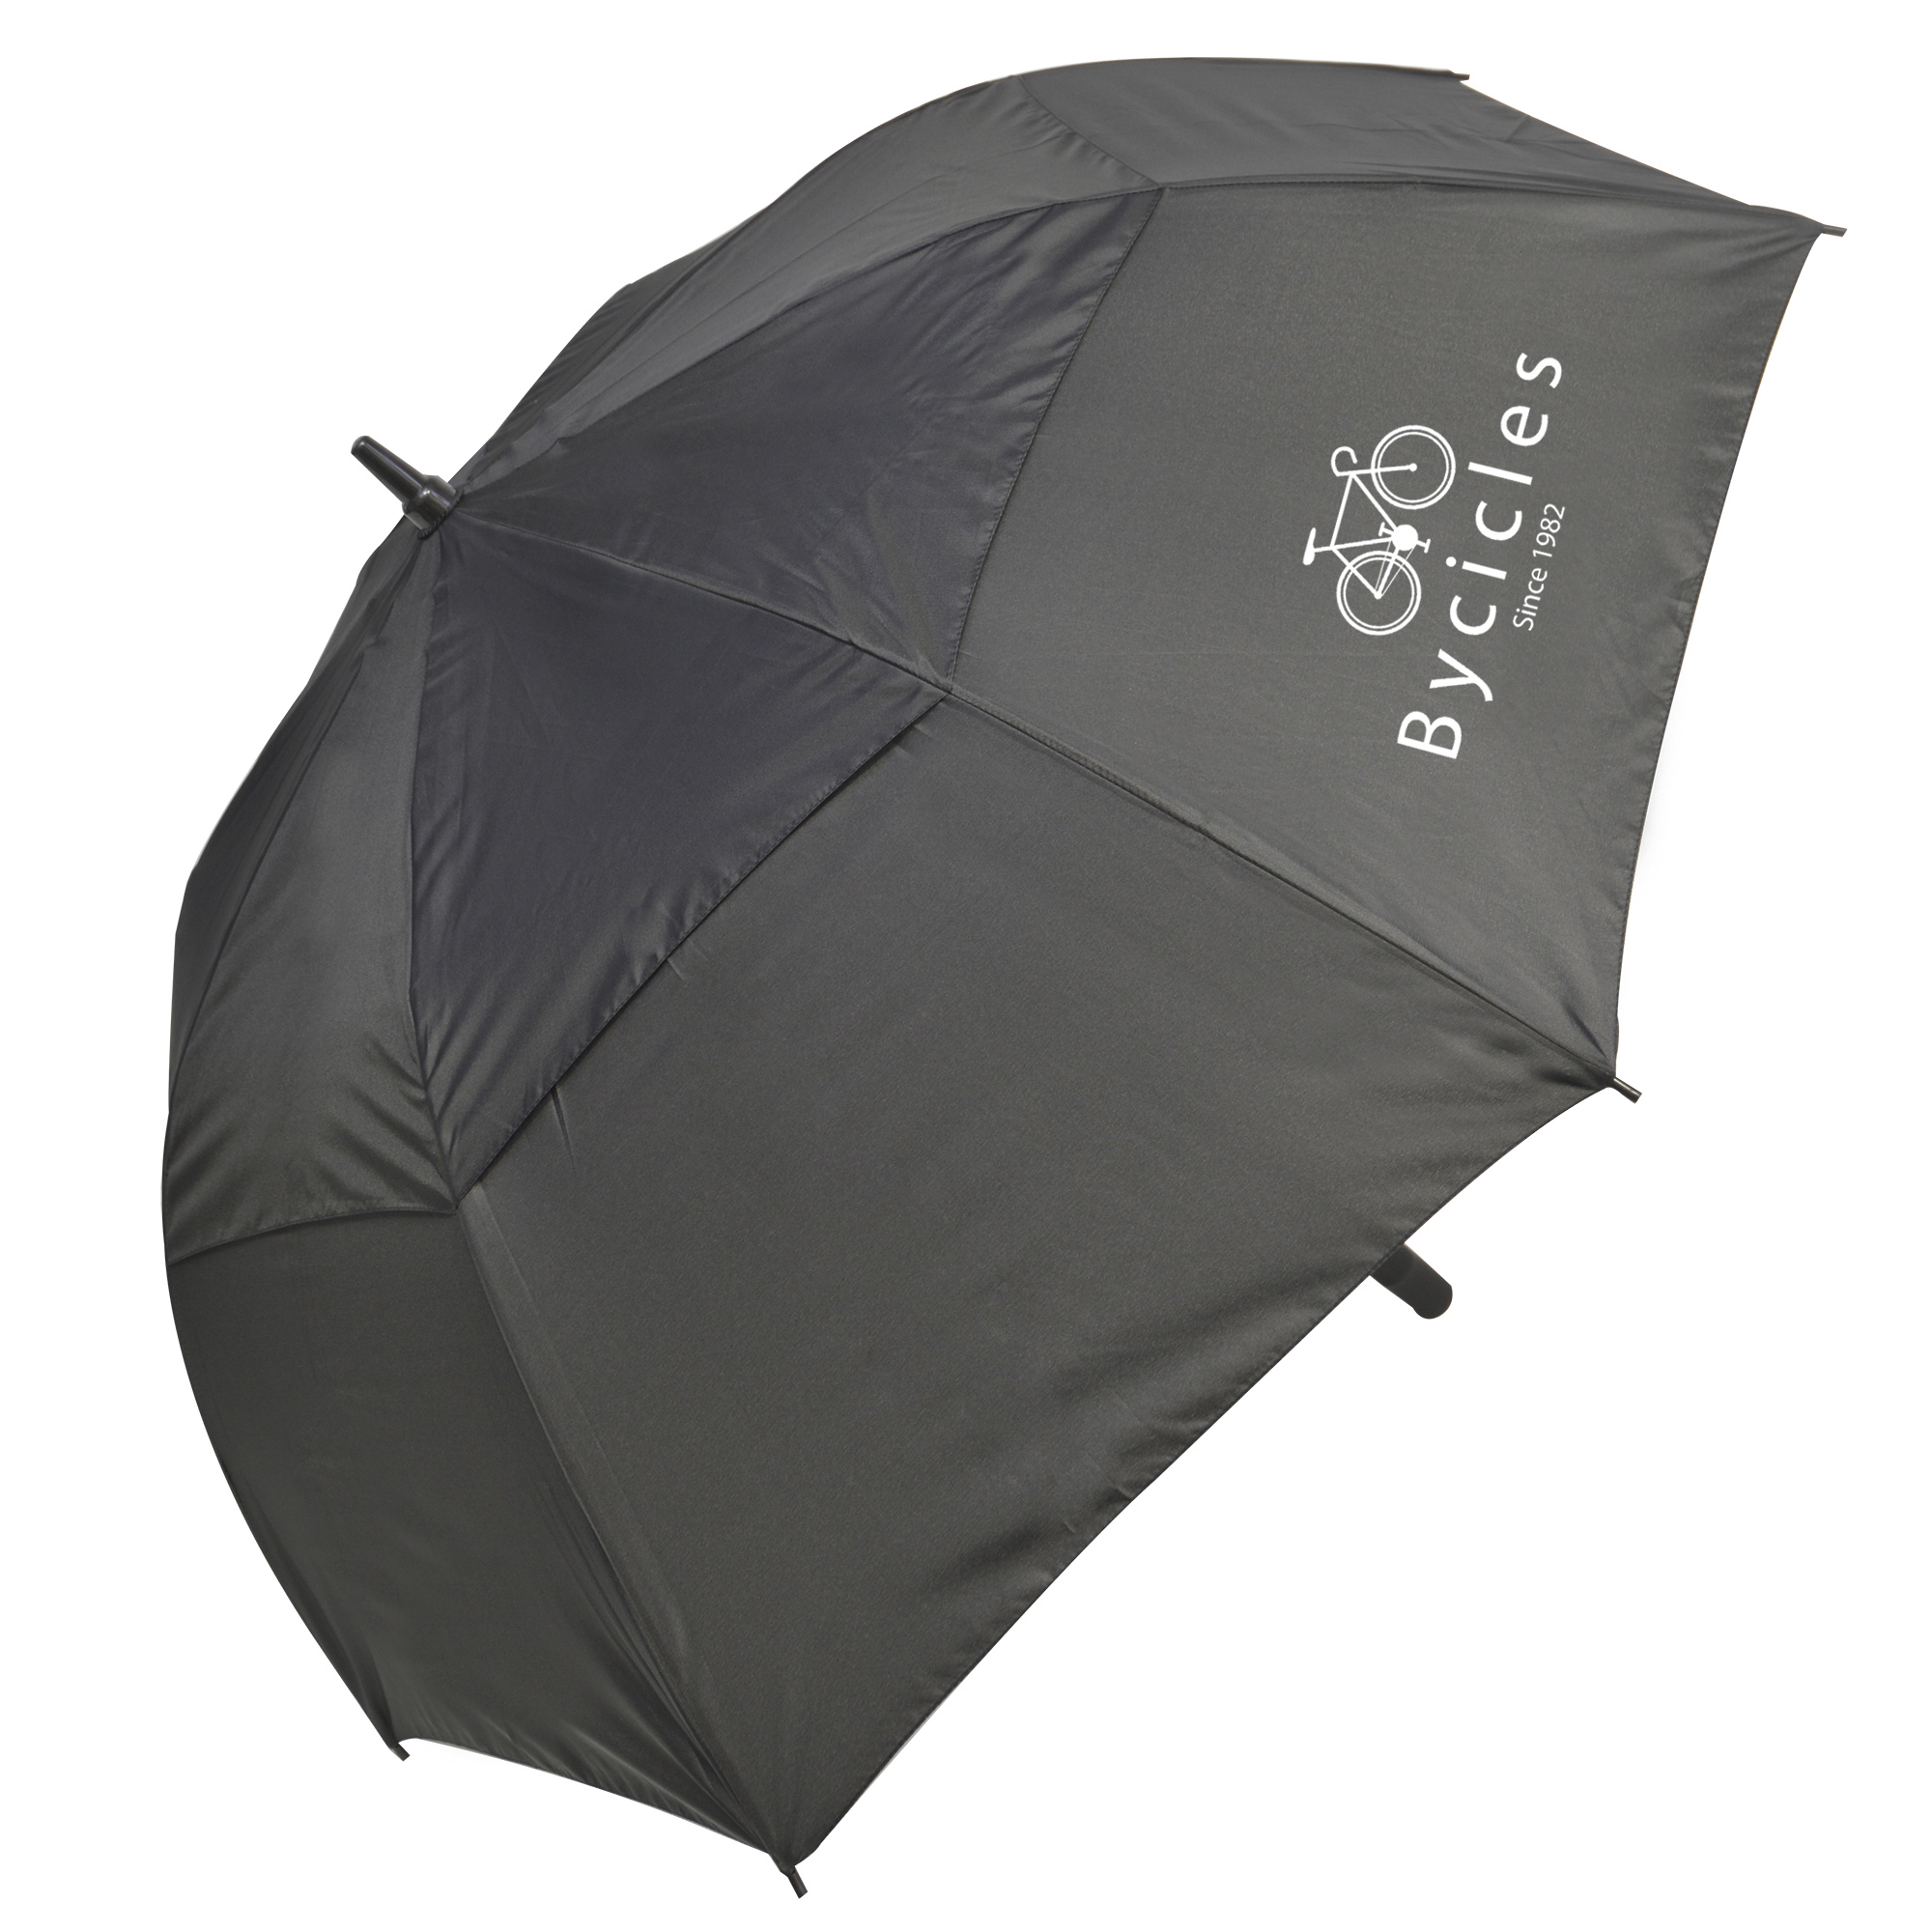 Promotional Sevier 30 Inch Double Canopy Automatic Golf Umbrella